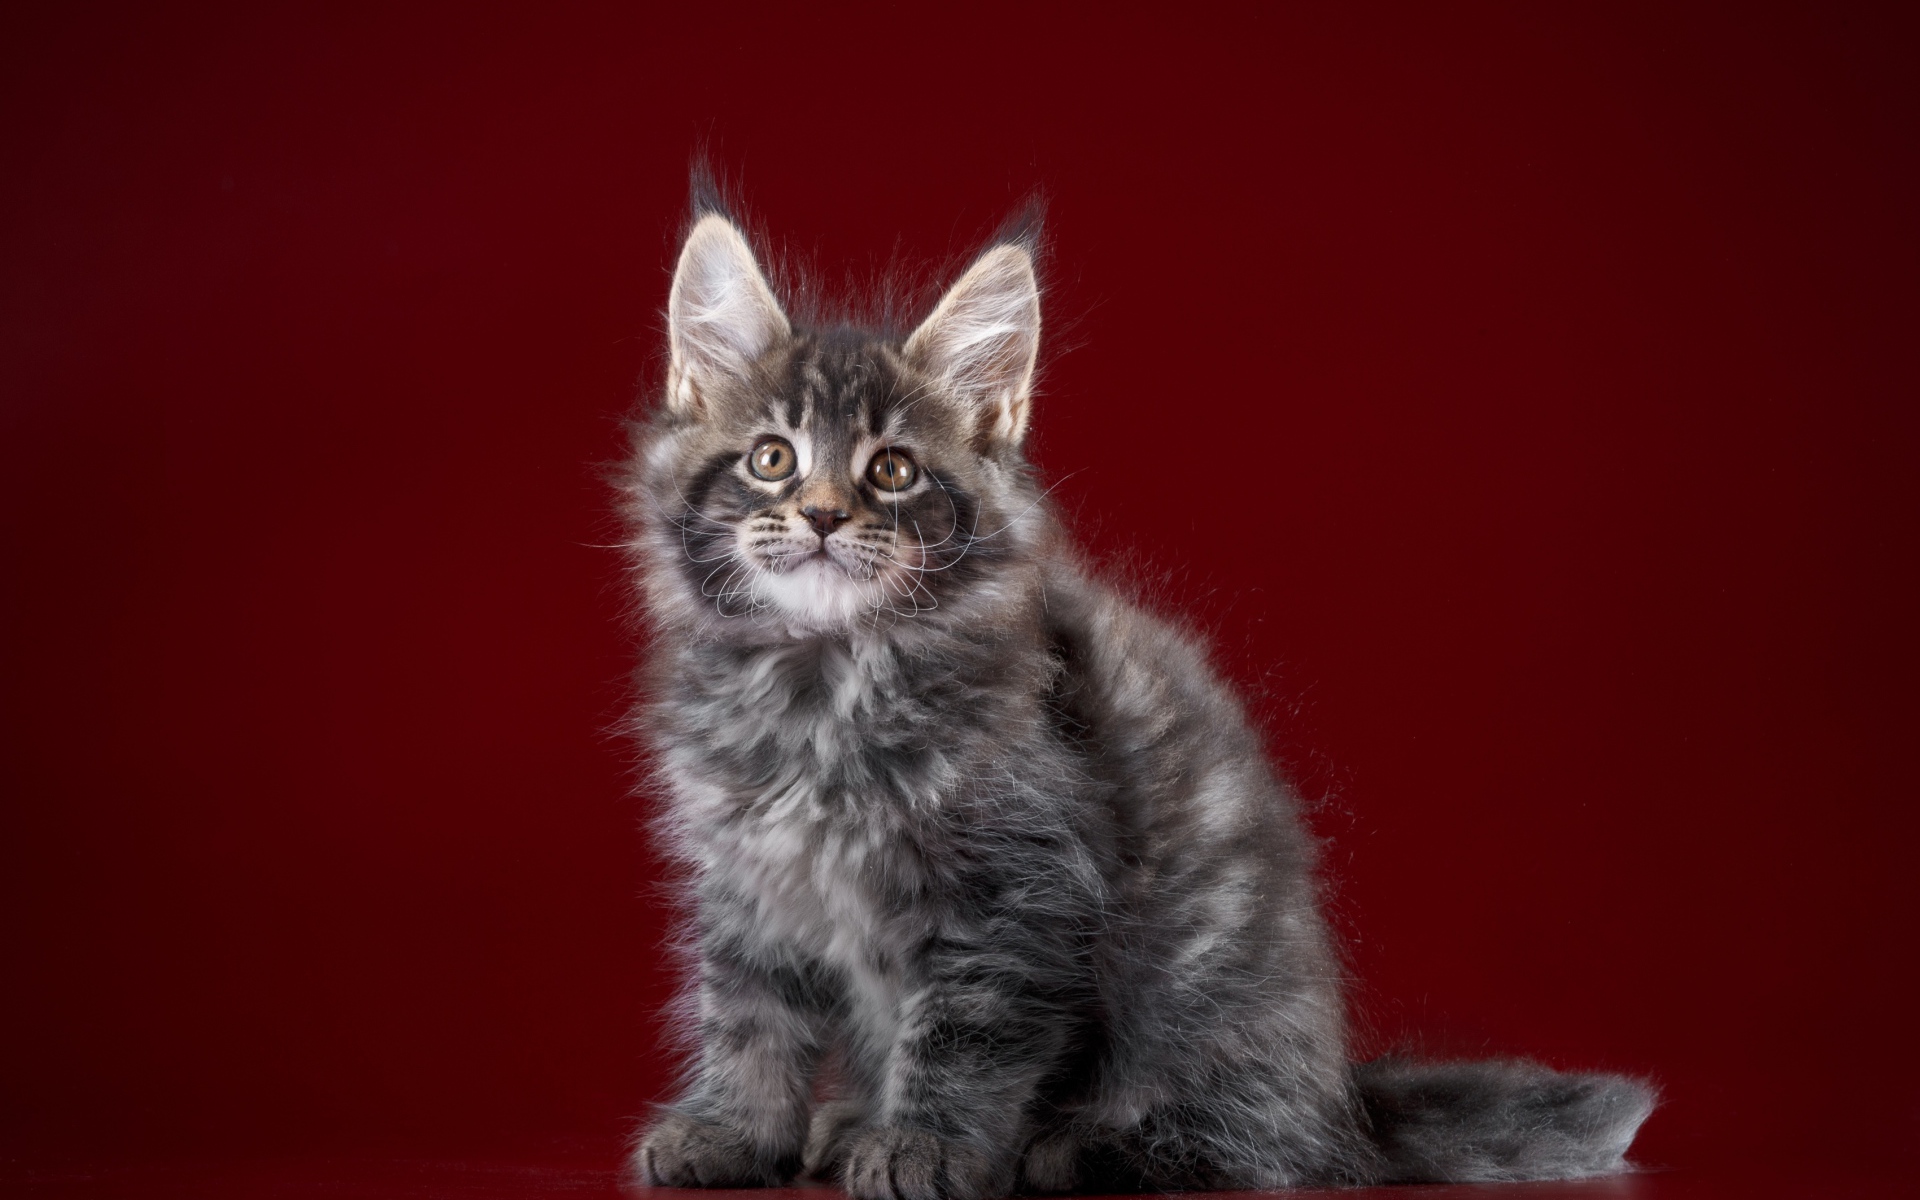 Fluffy gray Maine Coon kitten on a red background